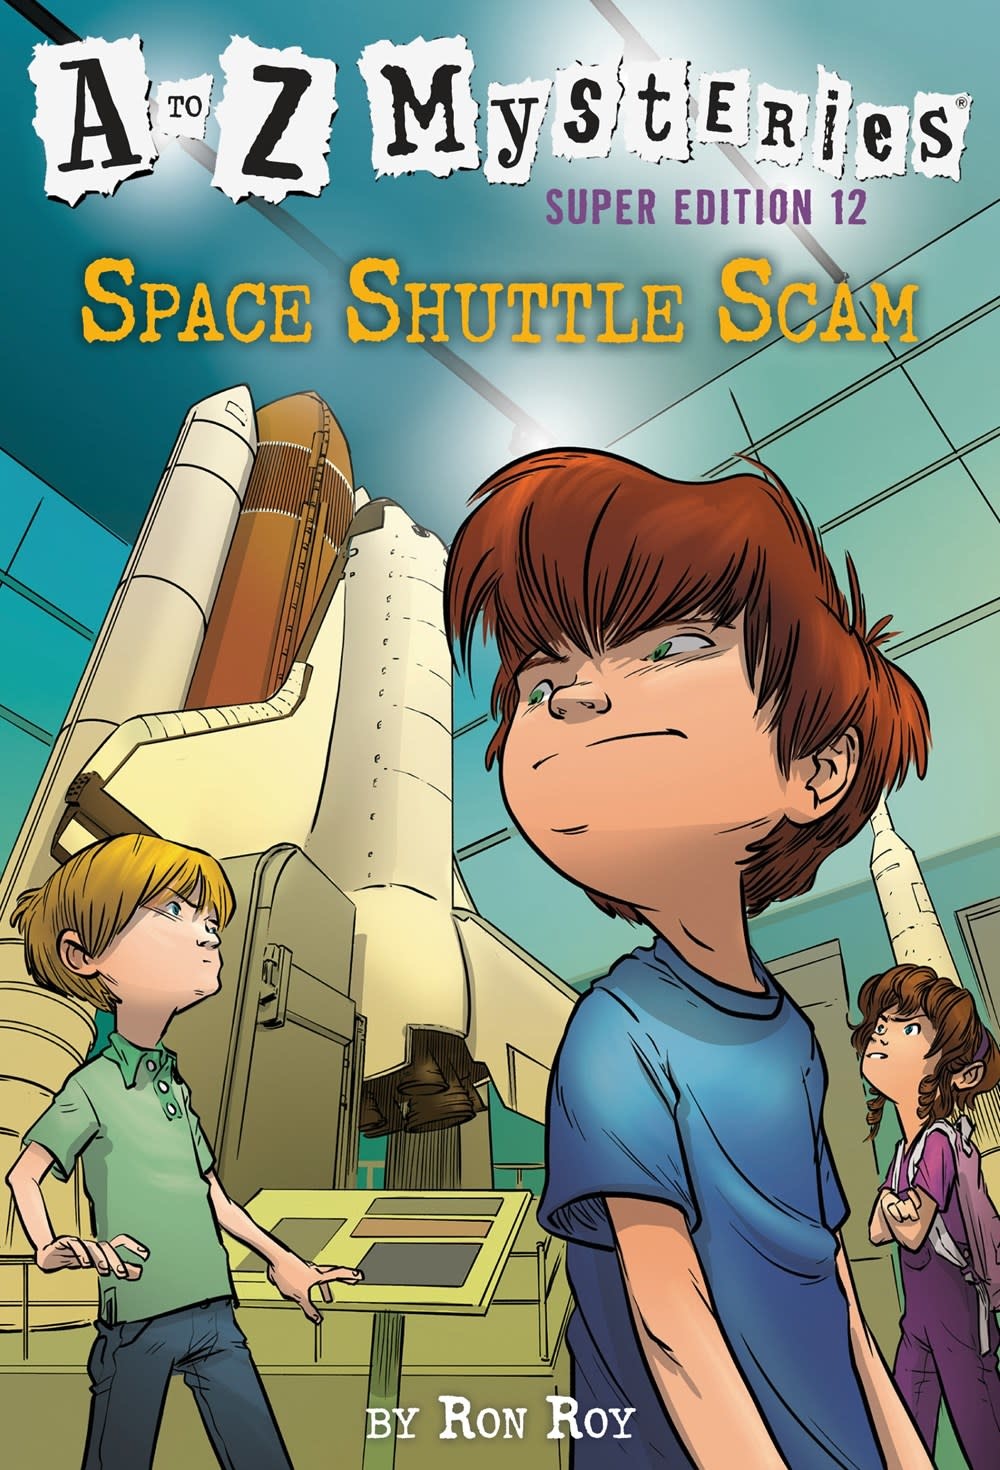 Random House Books for Young Readers A to Z Mysteries Super Edition #12 Space Shuttle Scam